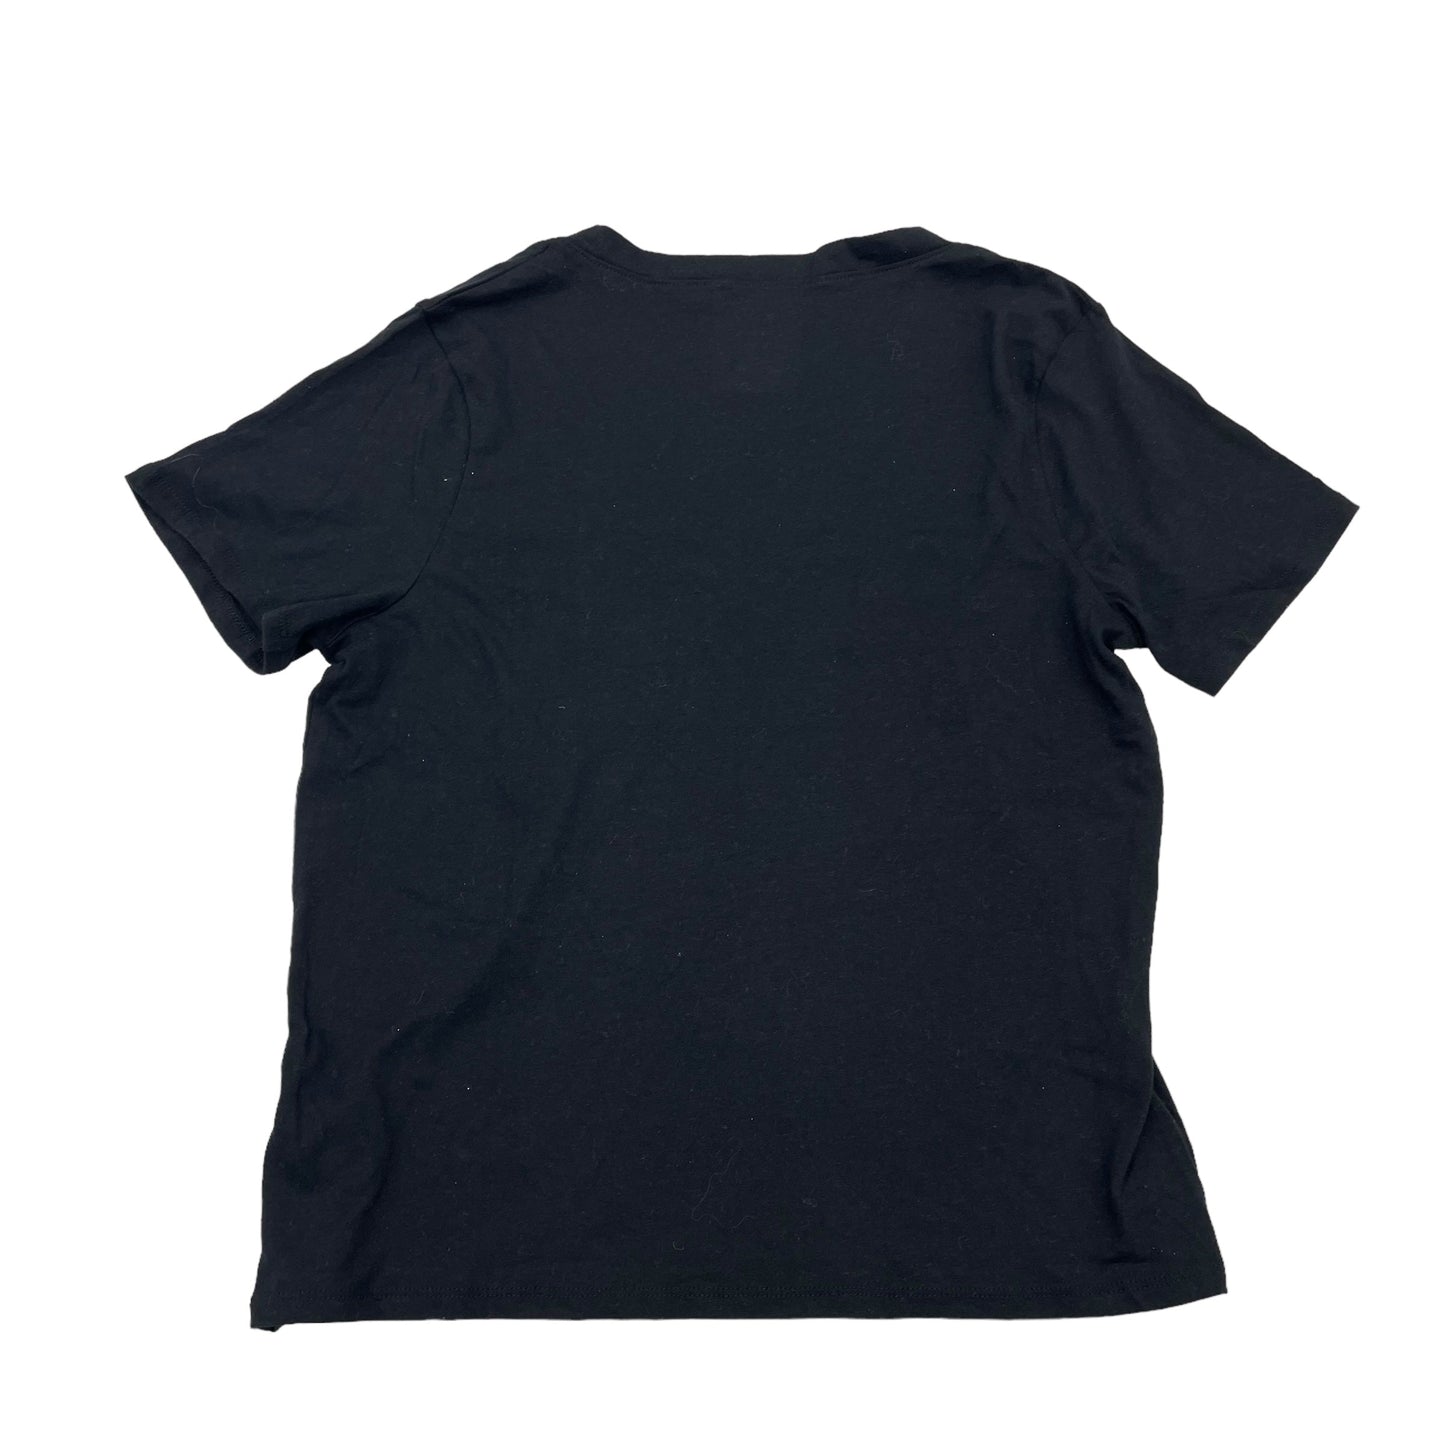 Black Top Short Sleeve A New Day, Size S